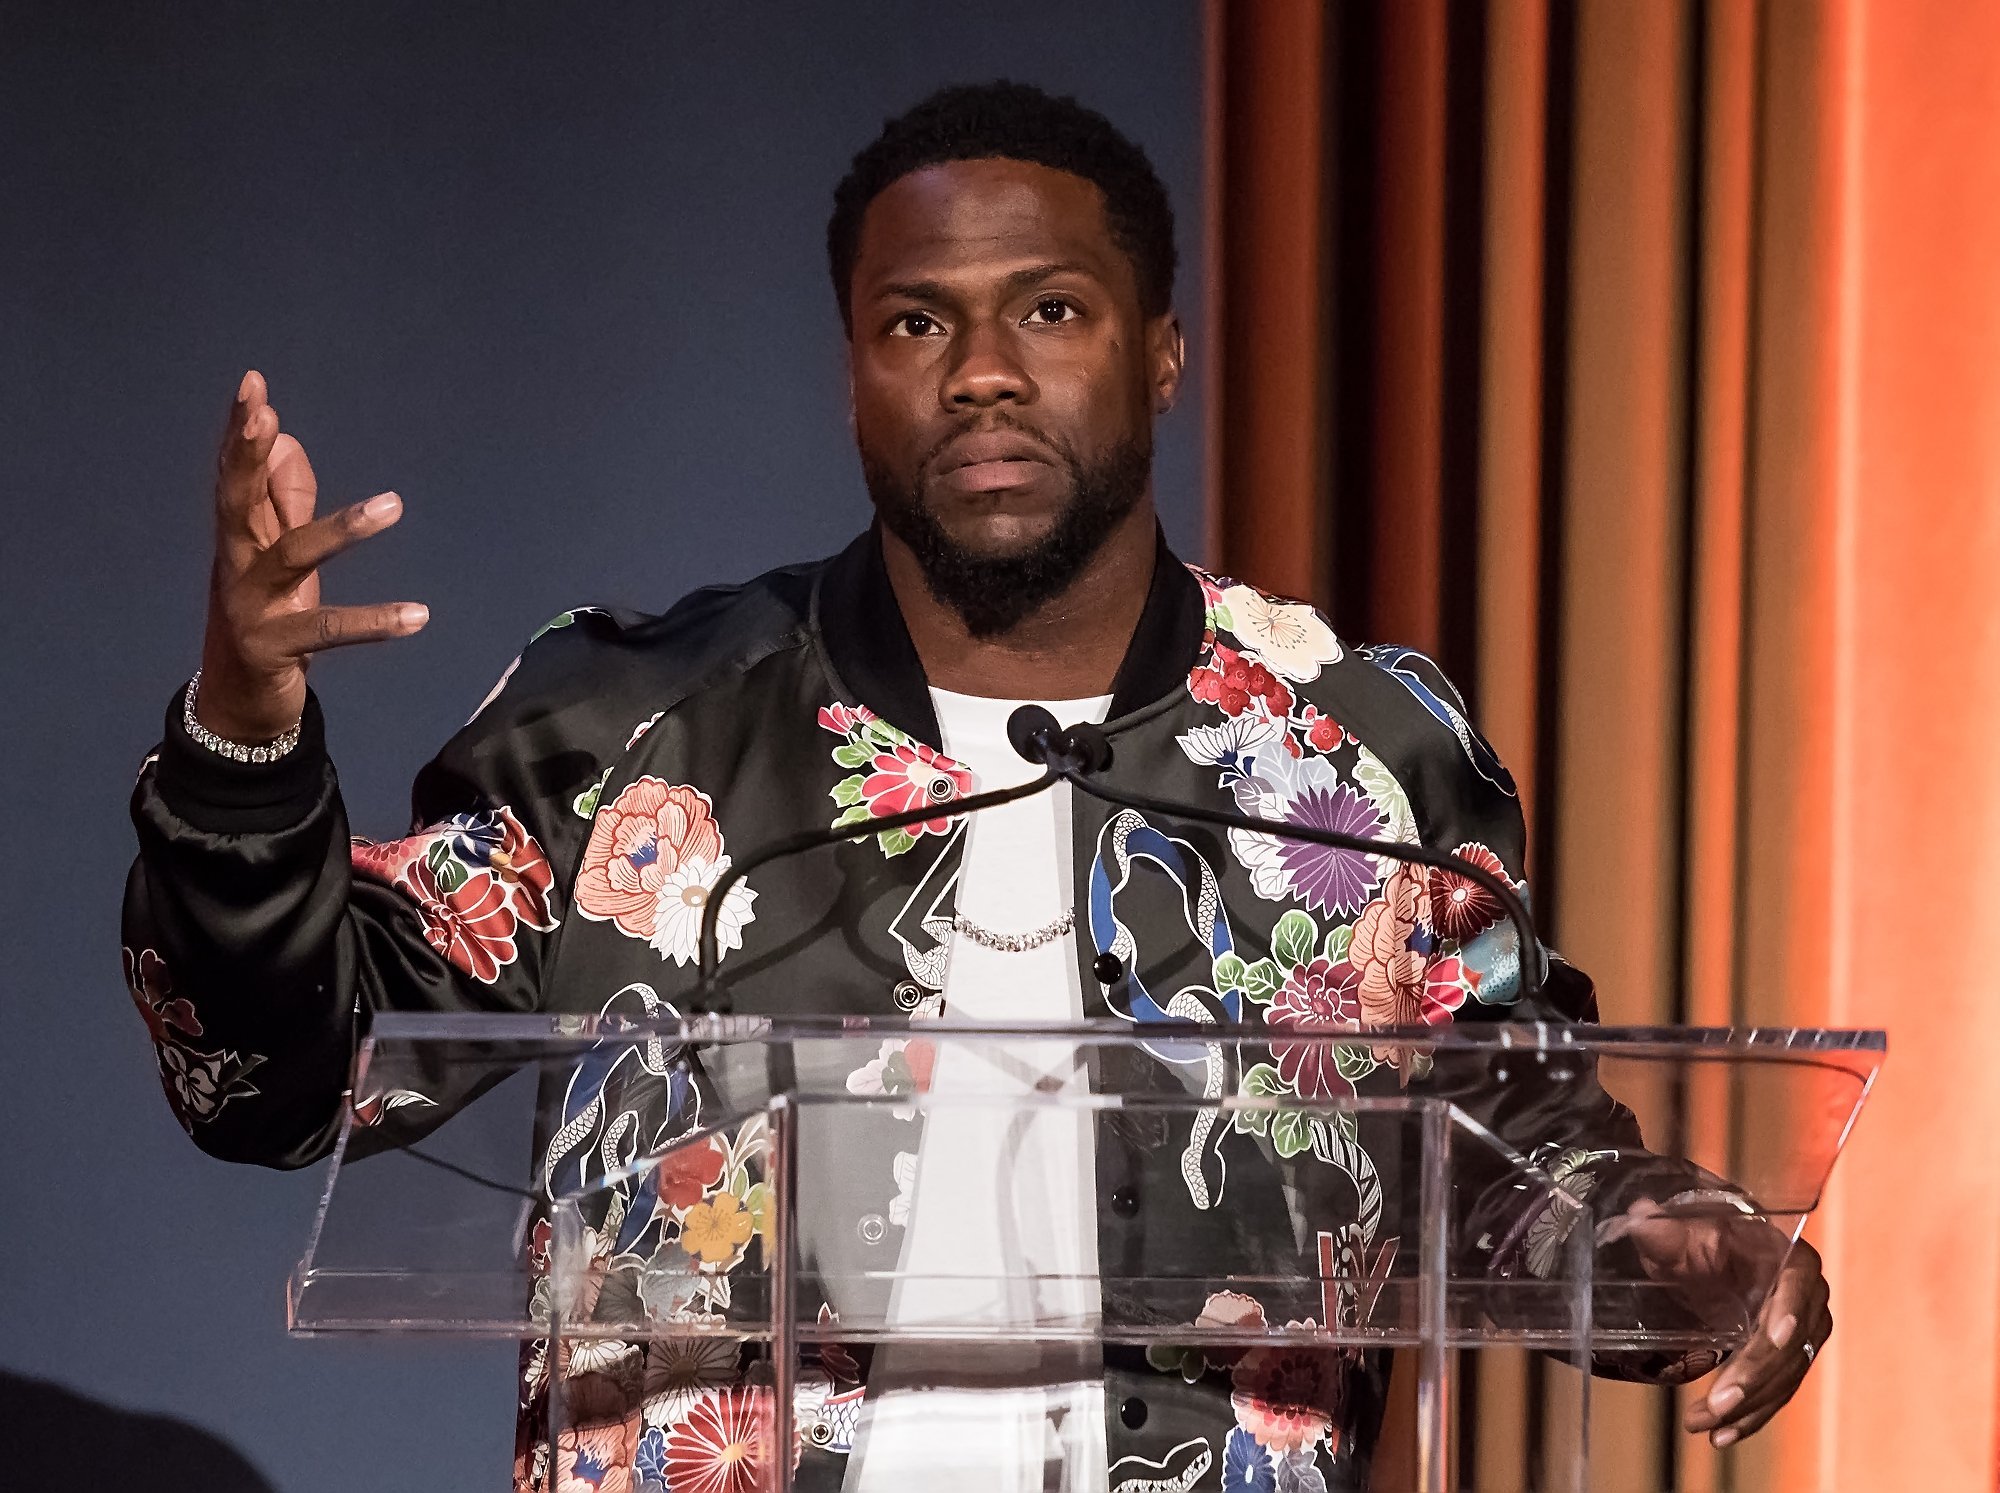 Kevin Hart at the 32nd Annual Arts & Business Council Awards on May 23, 2017 in Pennsylvania | Photo: Getty Images